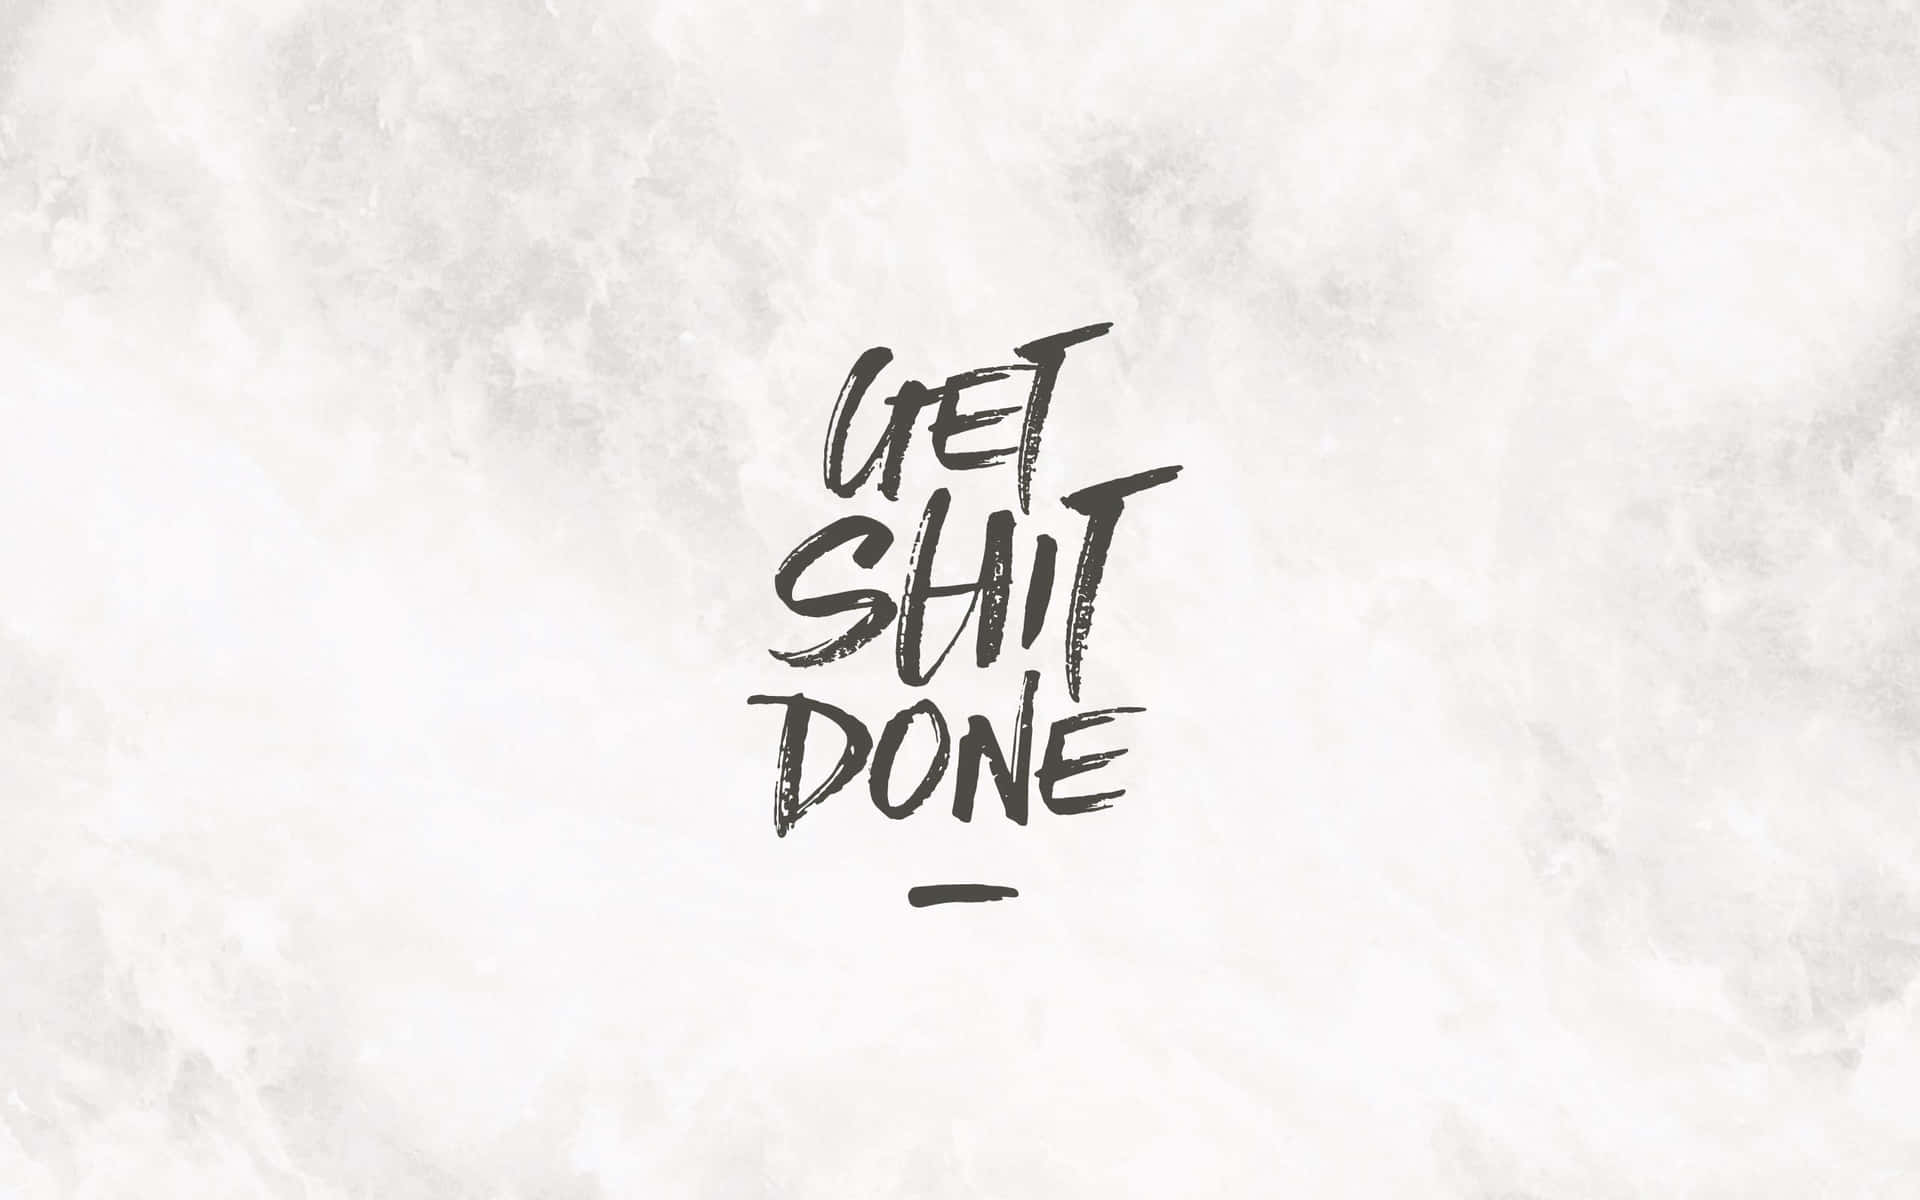 Get Shit Done Wallpaper